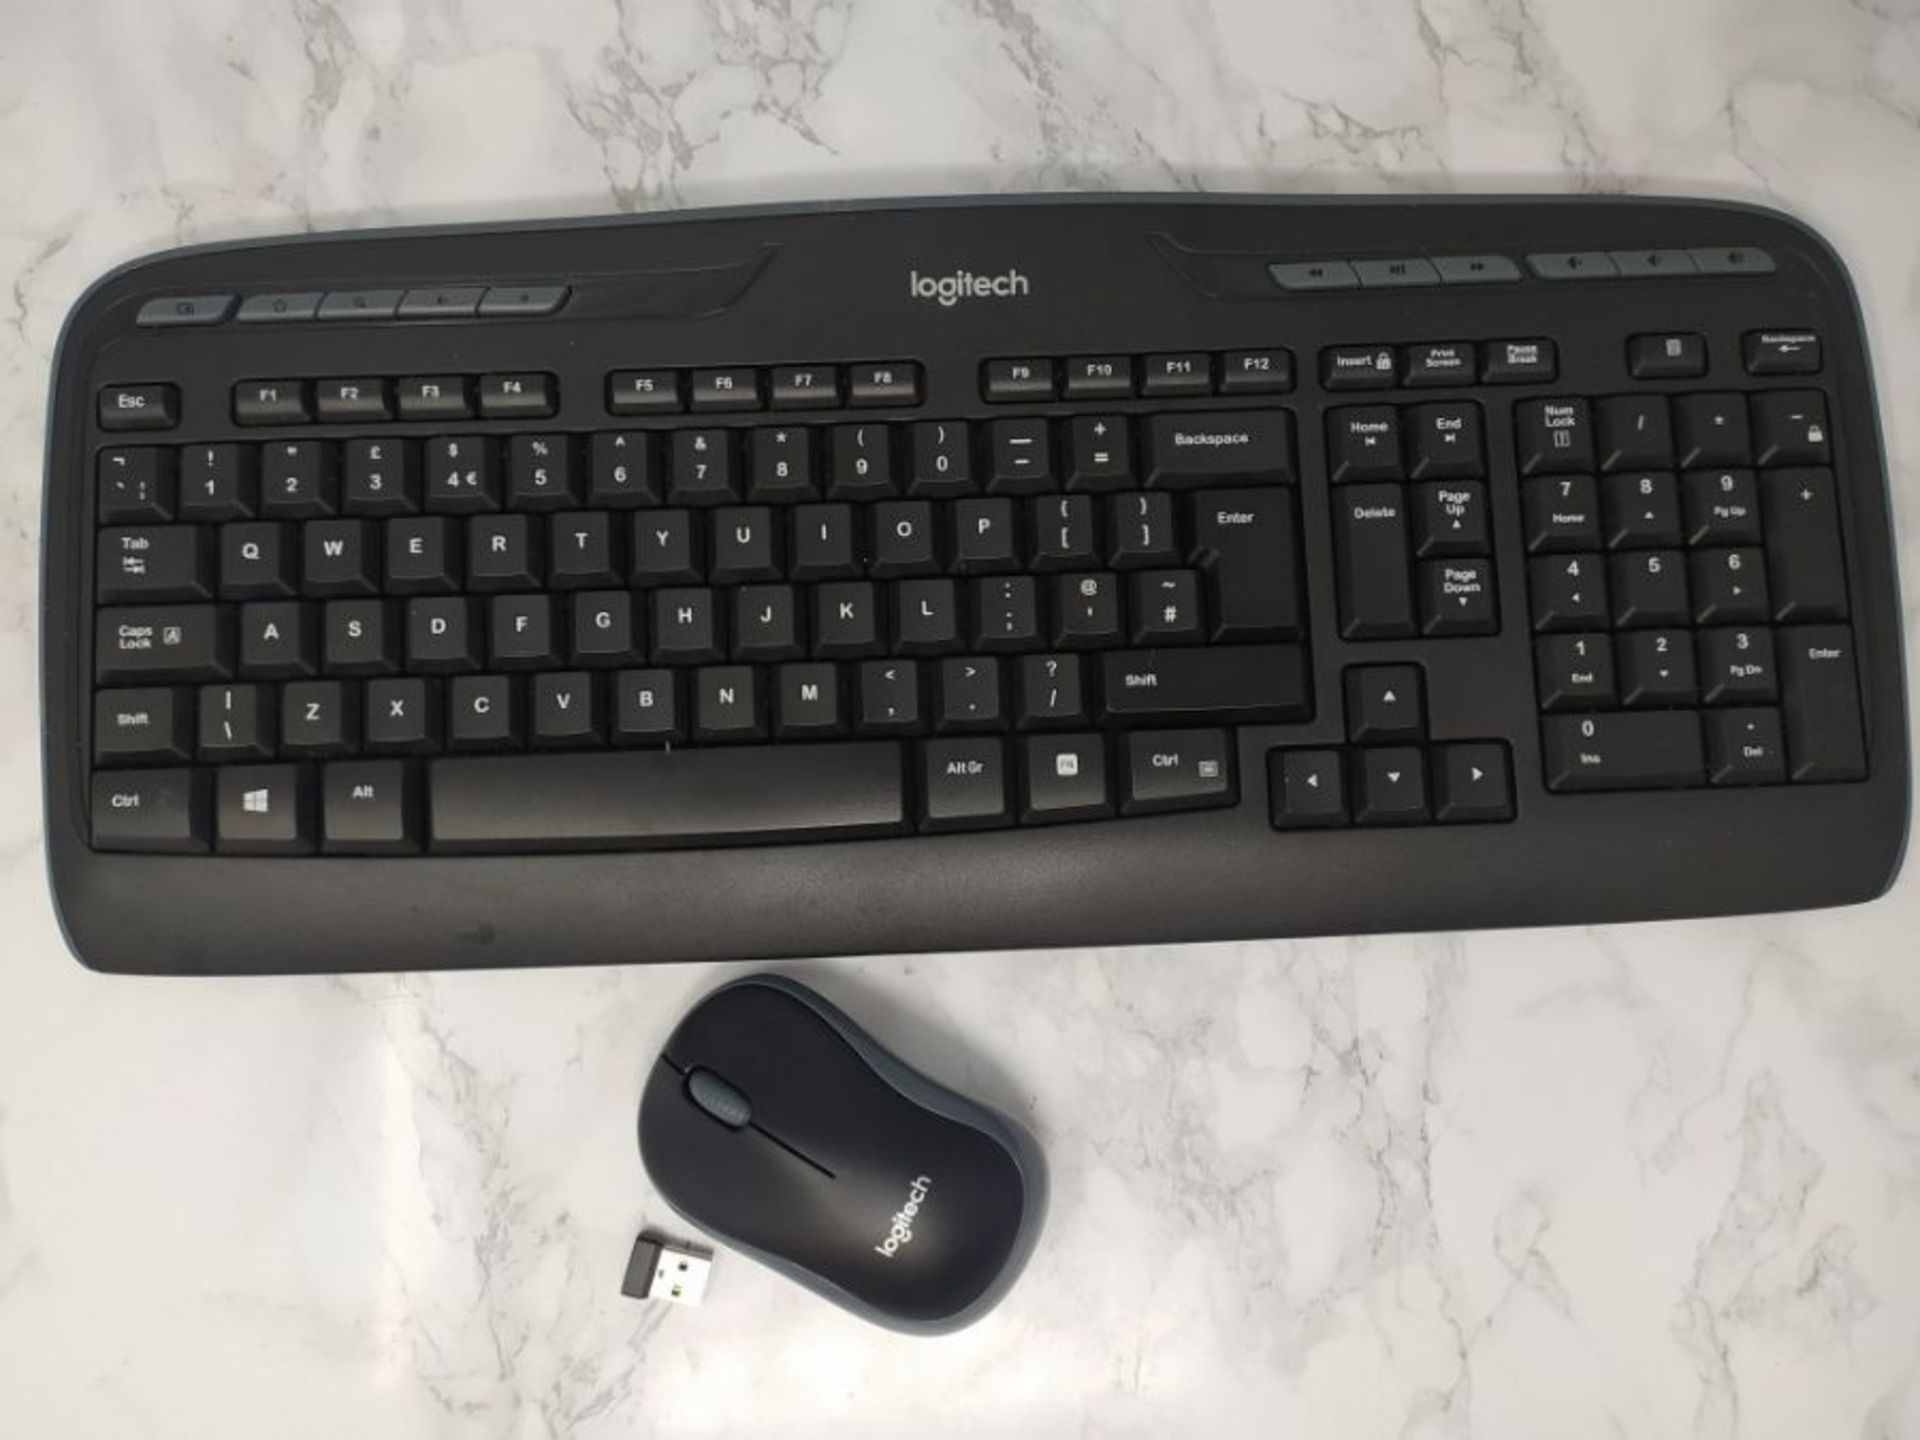 Logitech MK330 Wireless Keyboard and Mouse Combo for Windows, 2.4 GHz Wireless with US - Image 3 of 3